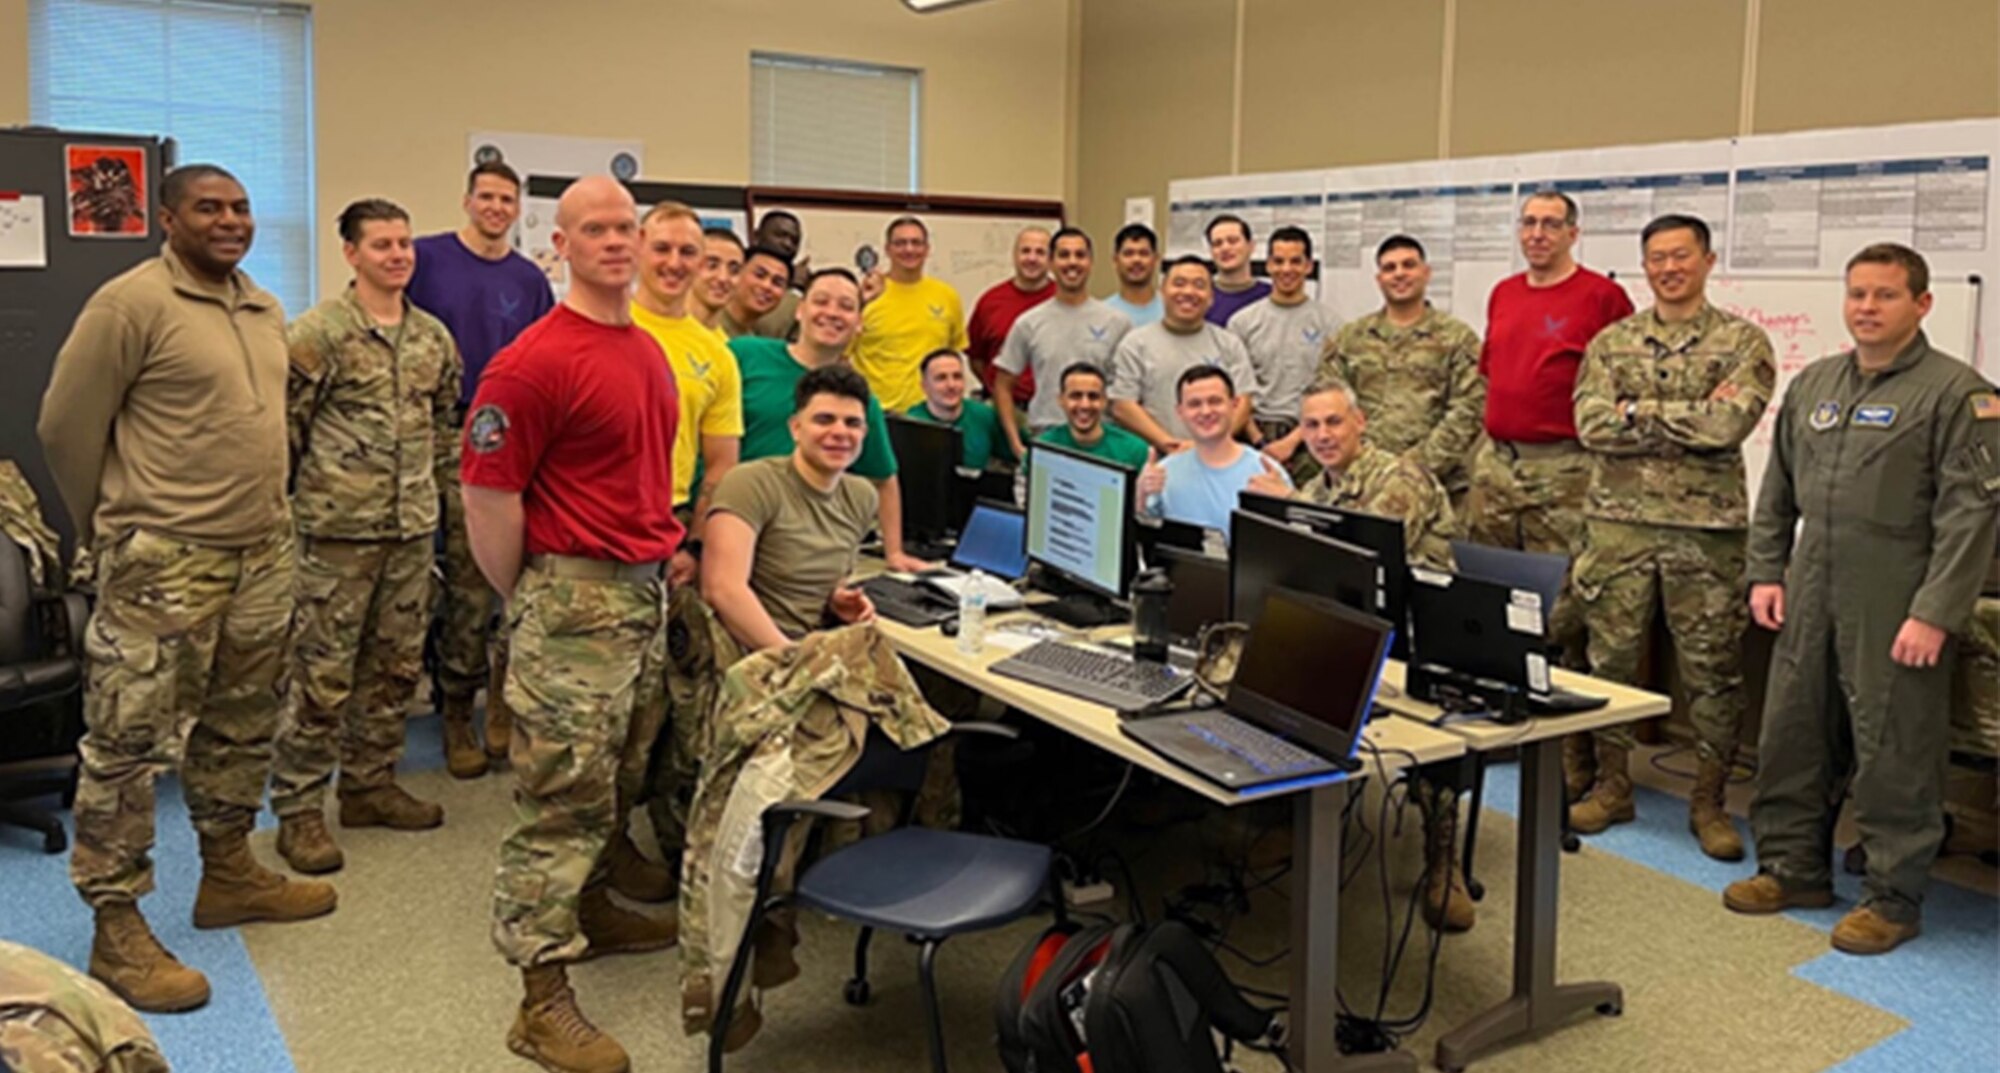 The 439th CS team wear different colored shirts to designate their cyber crew roles, modeled after crew roles used by JSTARS E-8C Air Battle Managers, in an effort to "operationalize" the cyber domain.